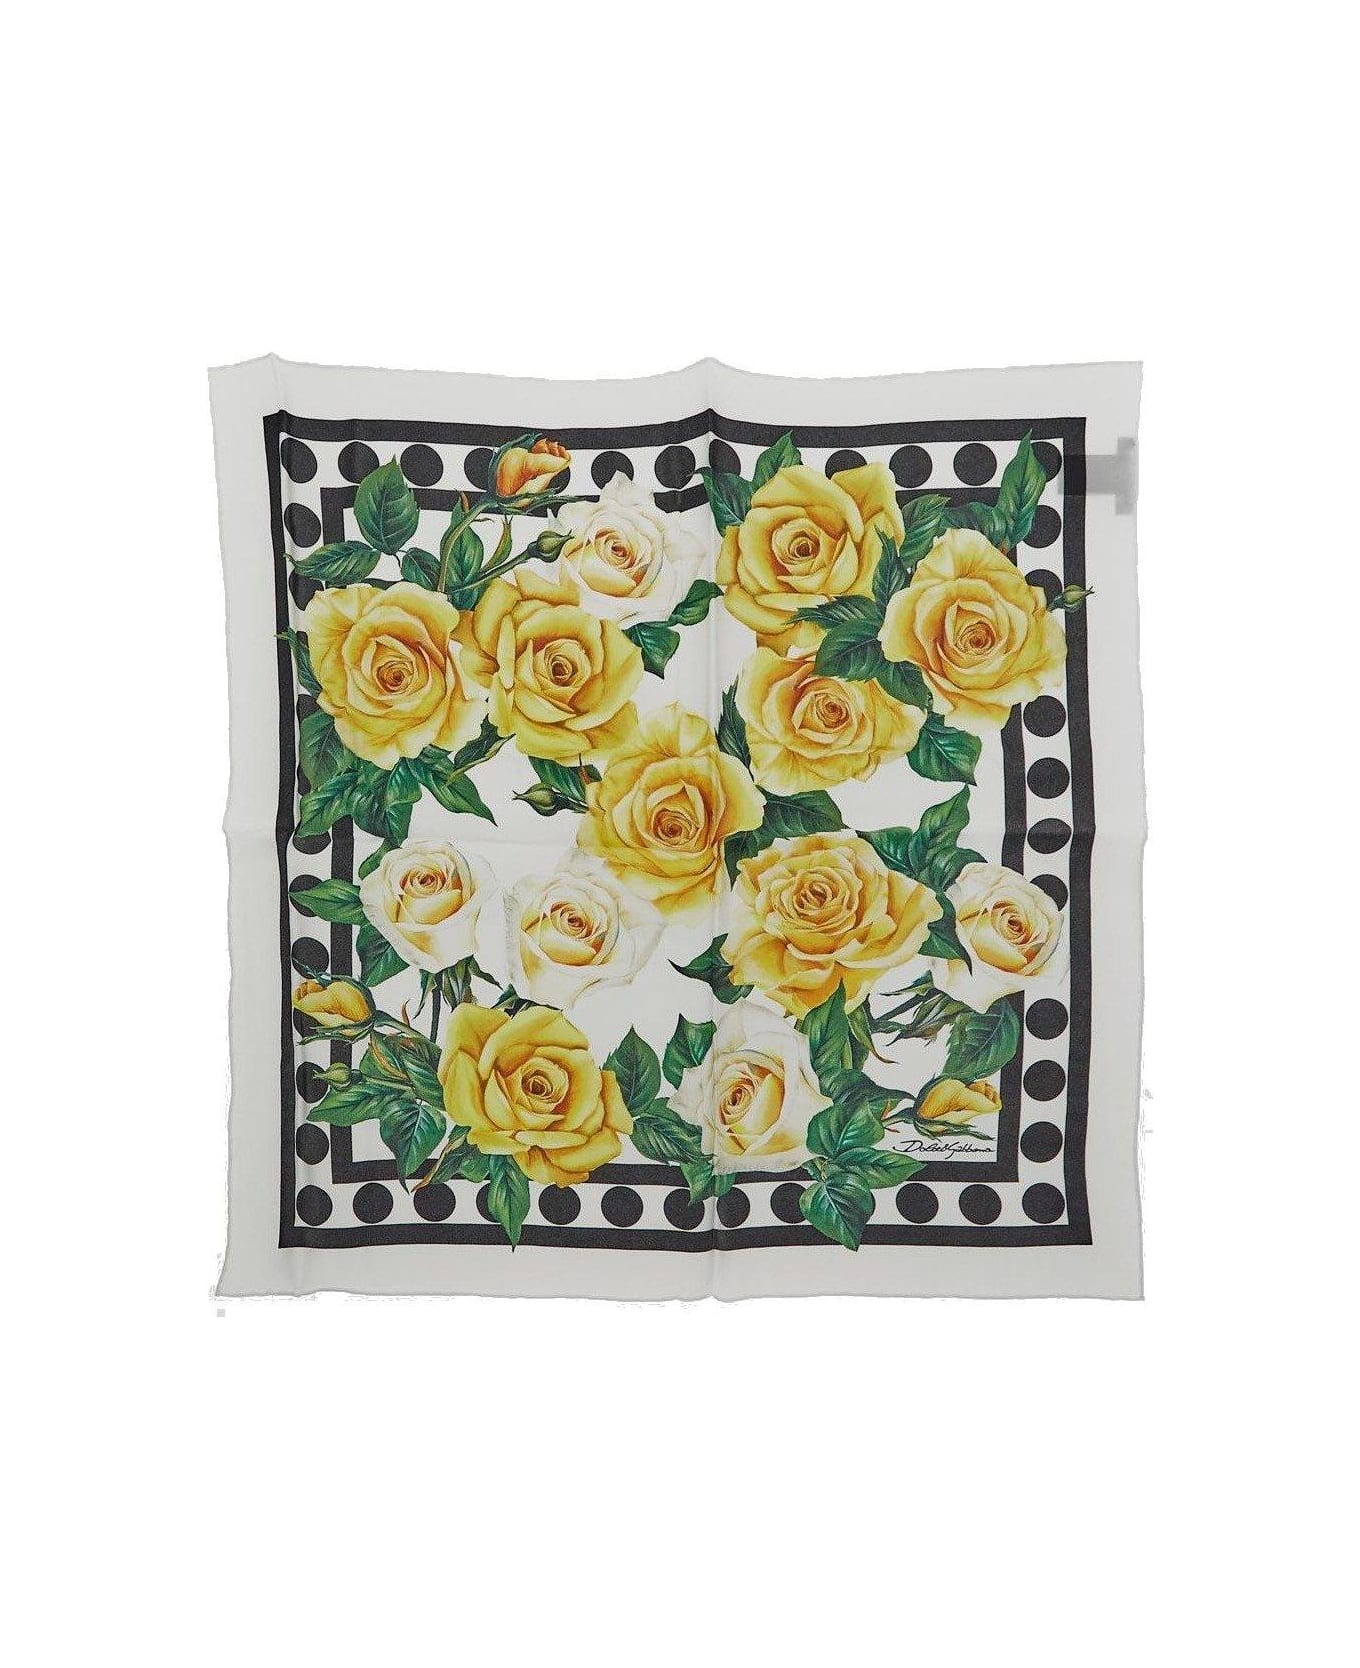 Dolce & Gabbana Floral Printed Square Scarf - Rose gialle fdo bco スカーフ＆ストール